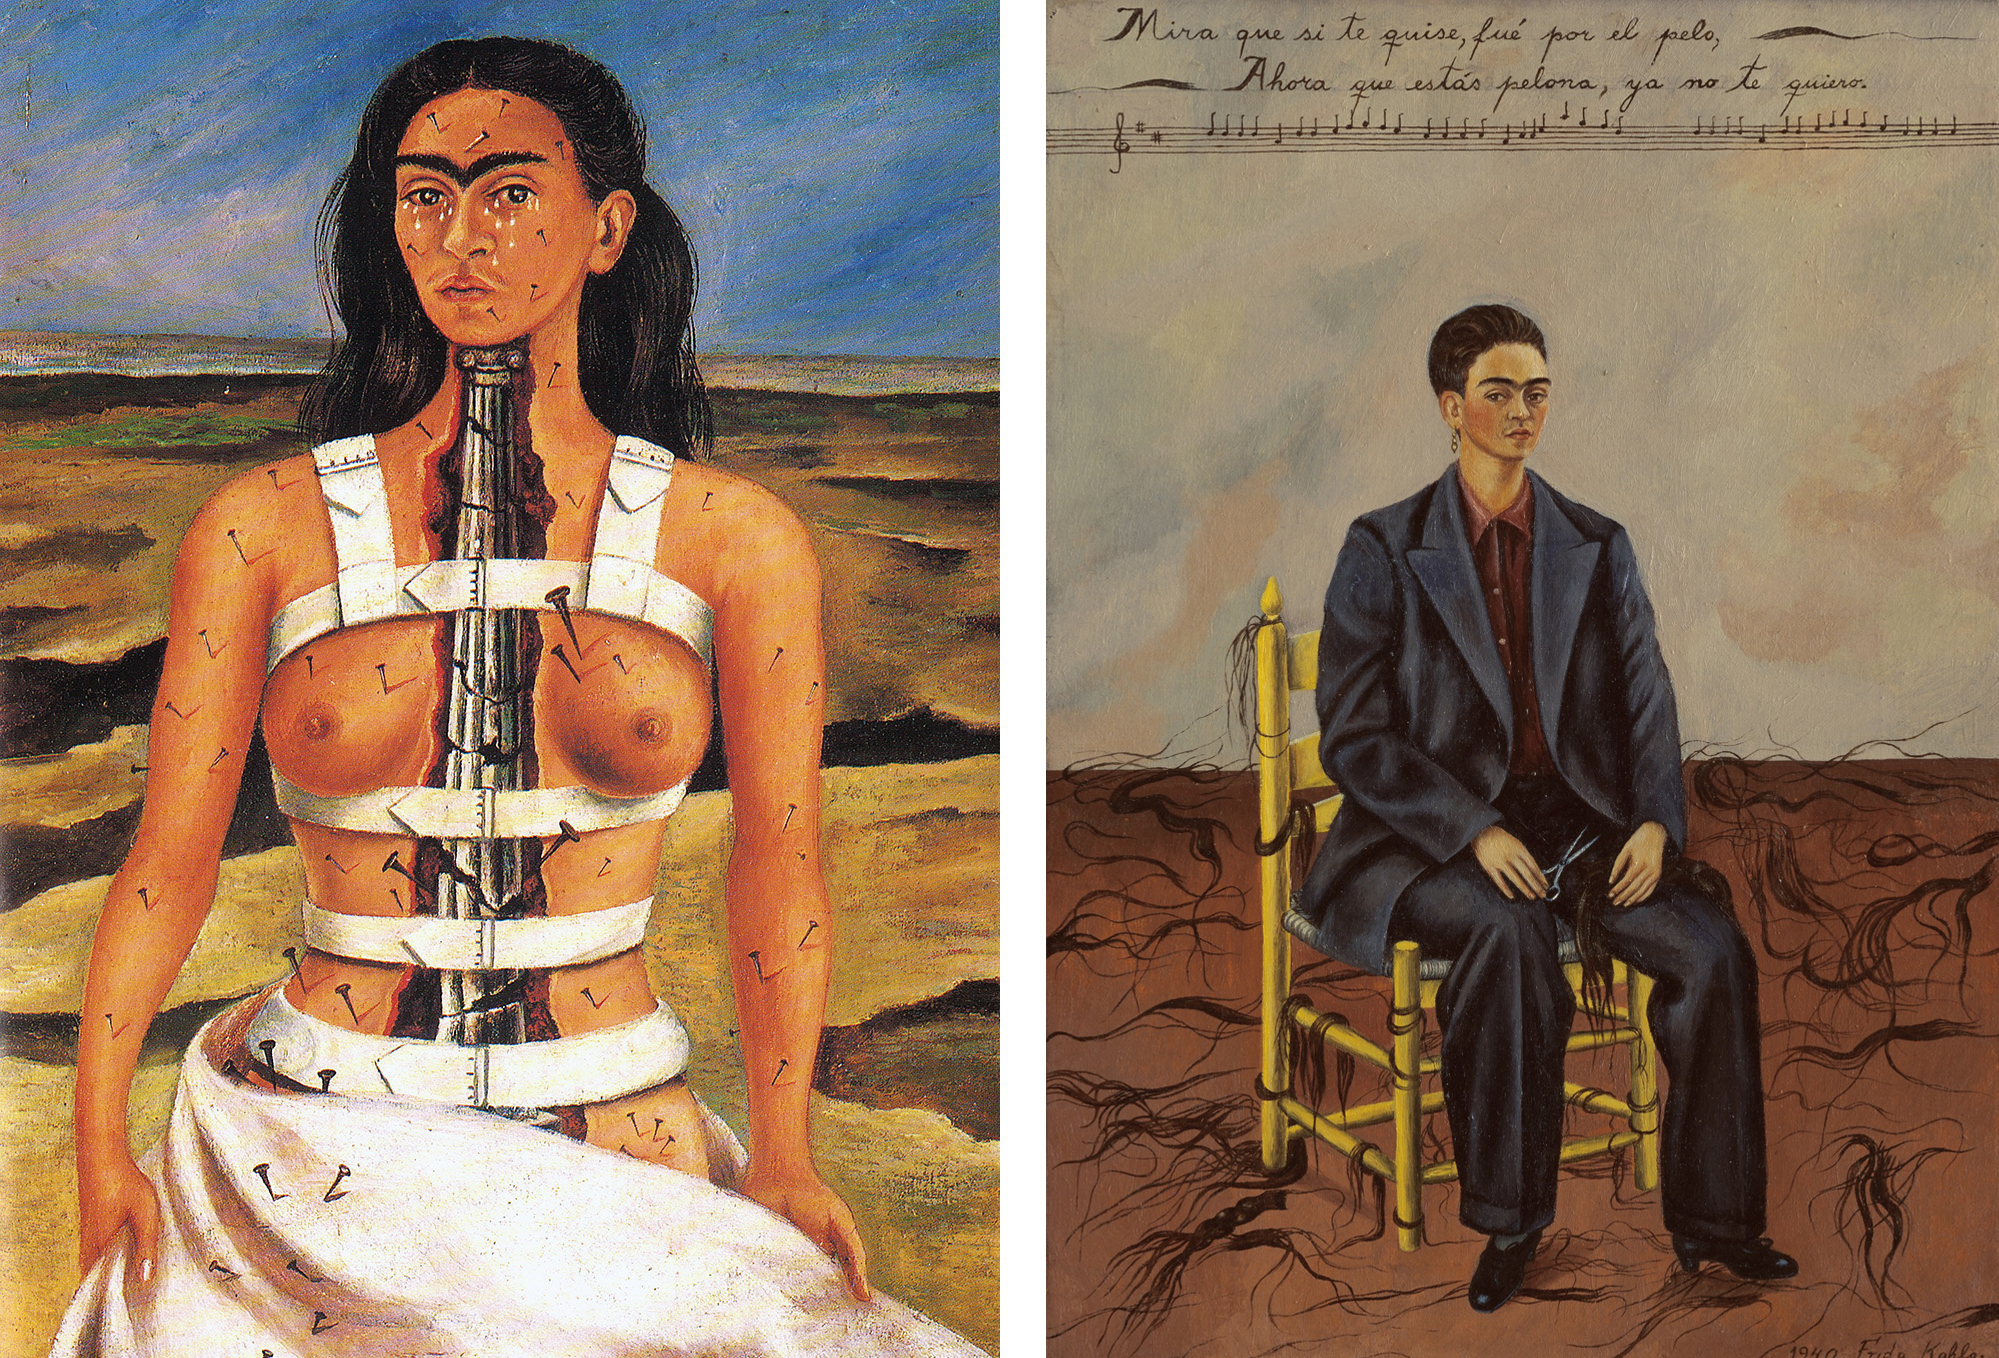 Left: Frida Kahlo, The Broken Column, 1944, oil on masonite, 30.5 x 39 cm (Museo Dolores Olmedo); Right: Frida Kahlo, Self Portrait with Cropped Hair, 1940, oil on canvas, 15 ¾ x 11 inches (MoMA) 